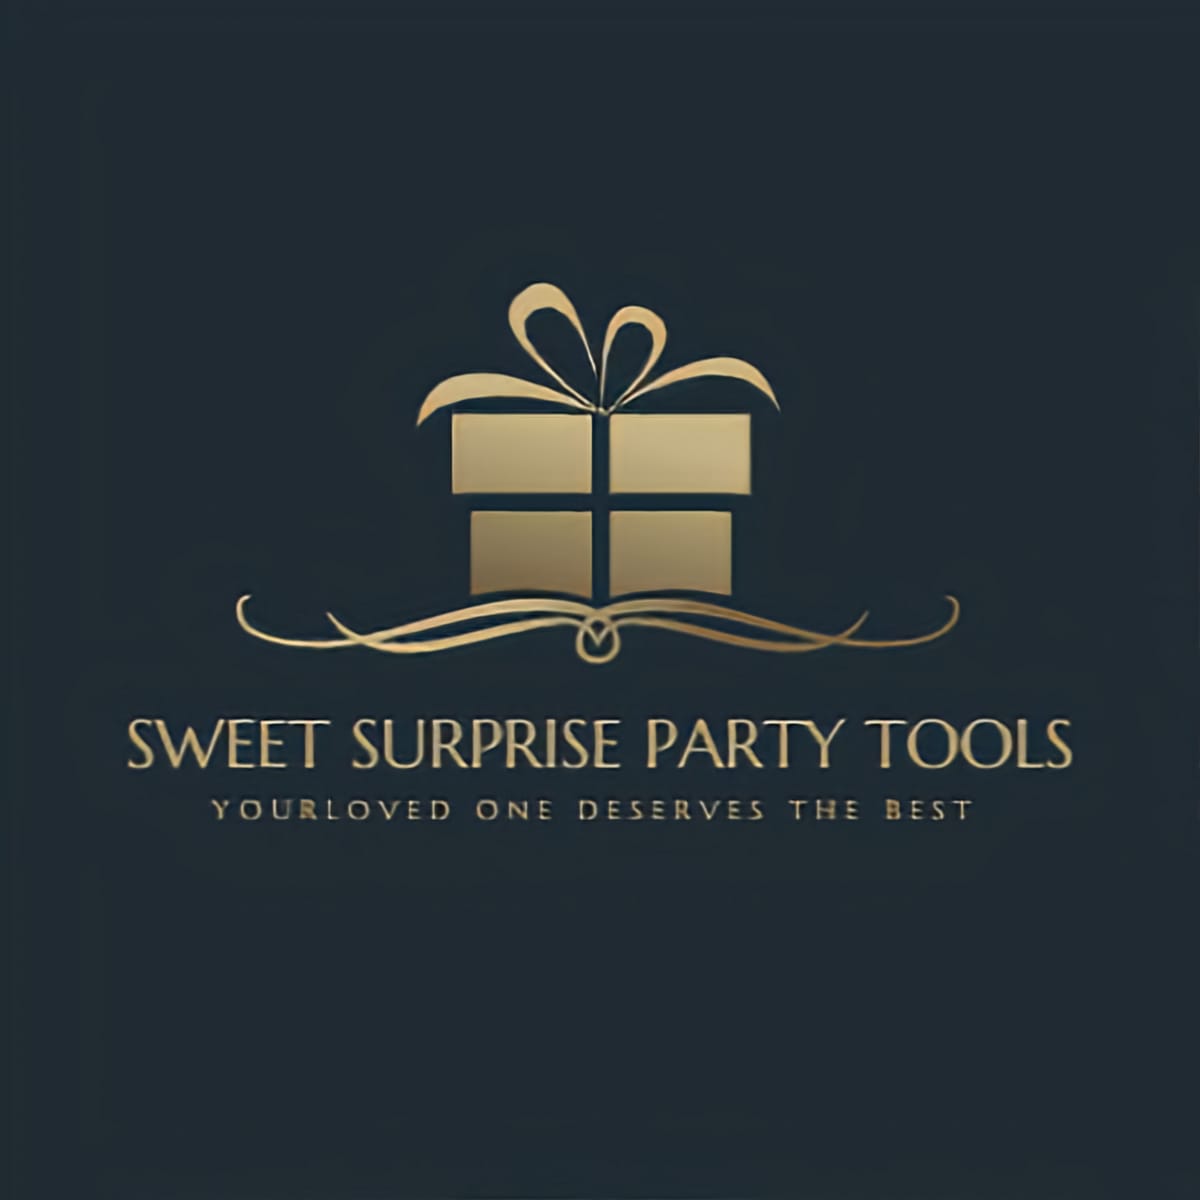 Sweet Surprise Party Tools